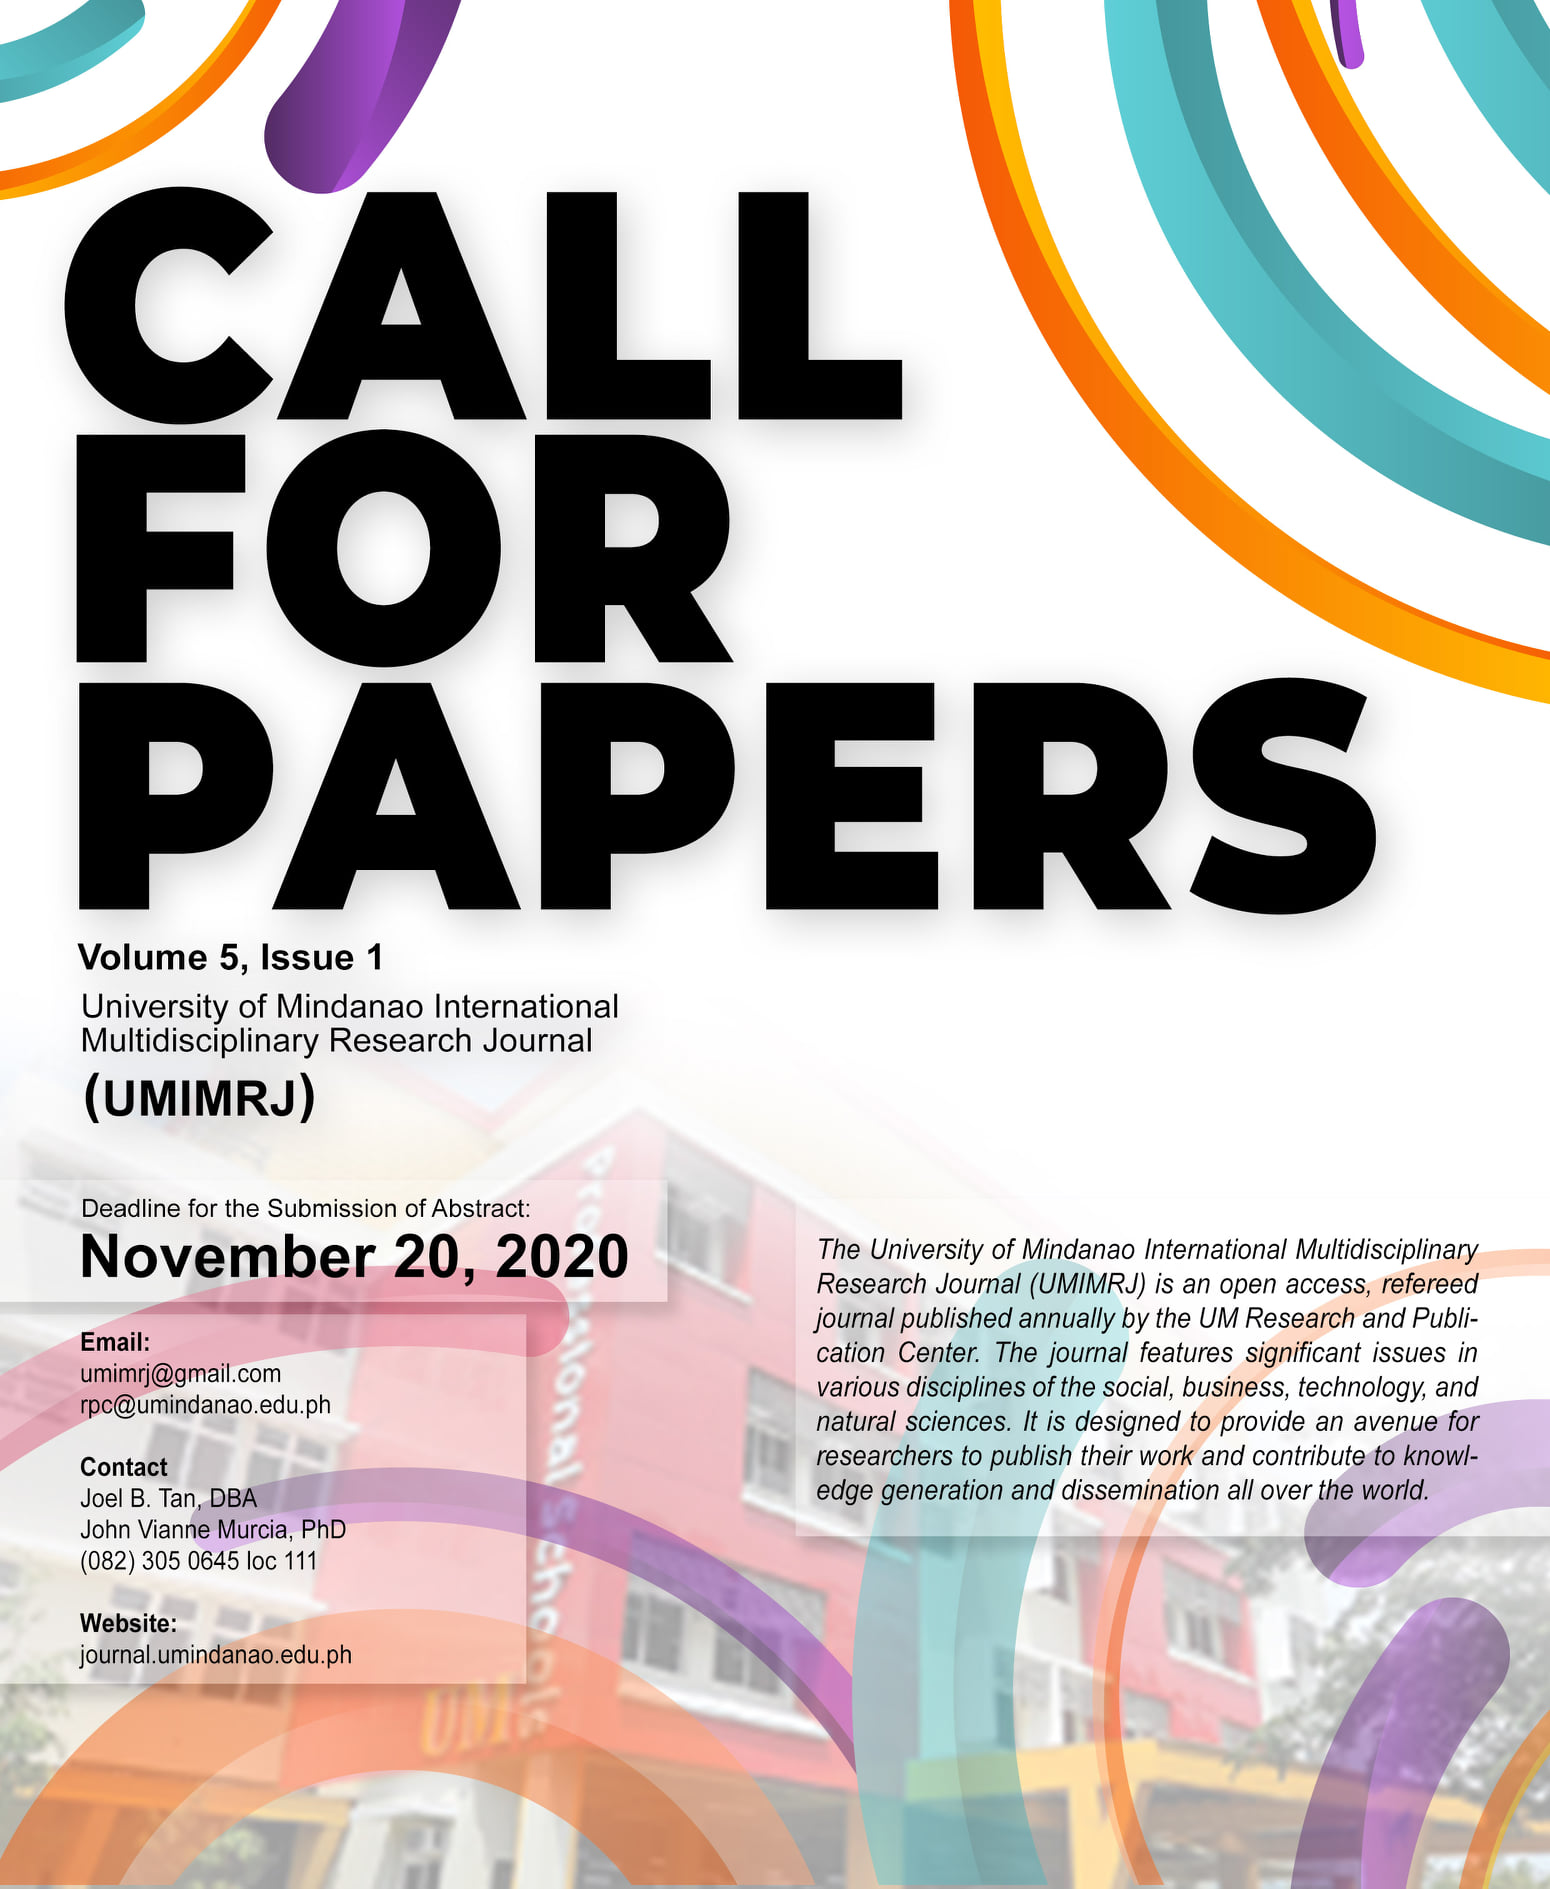 CALL FOR PAPERS: The University of Mindanao International Multidisciplinary Research Journal